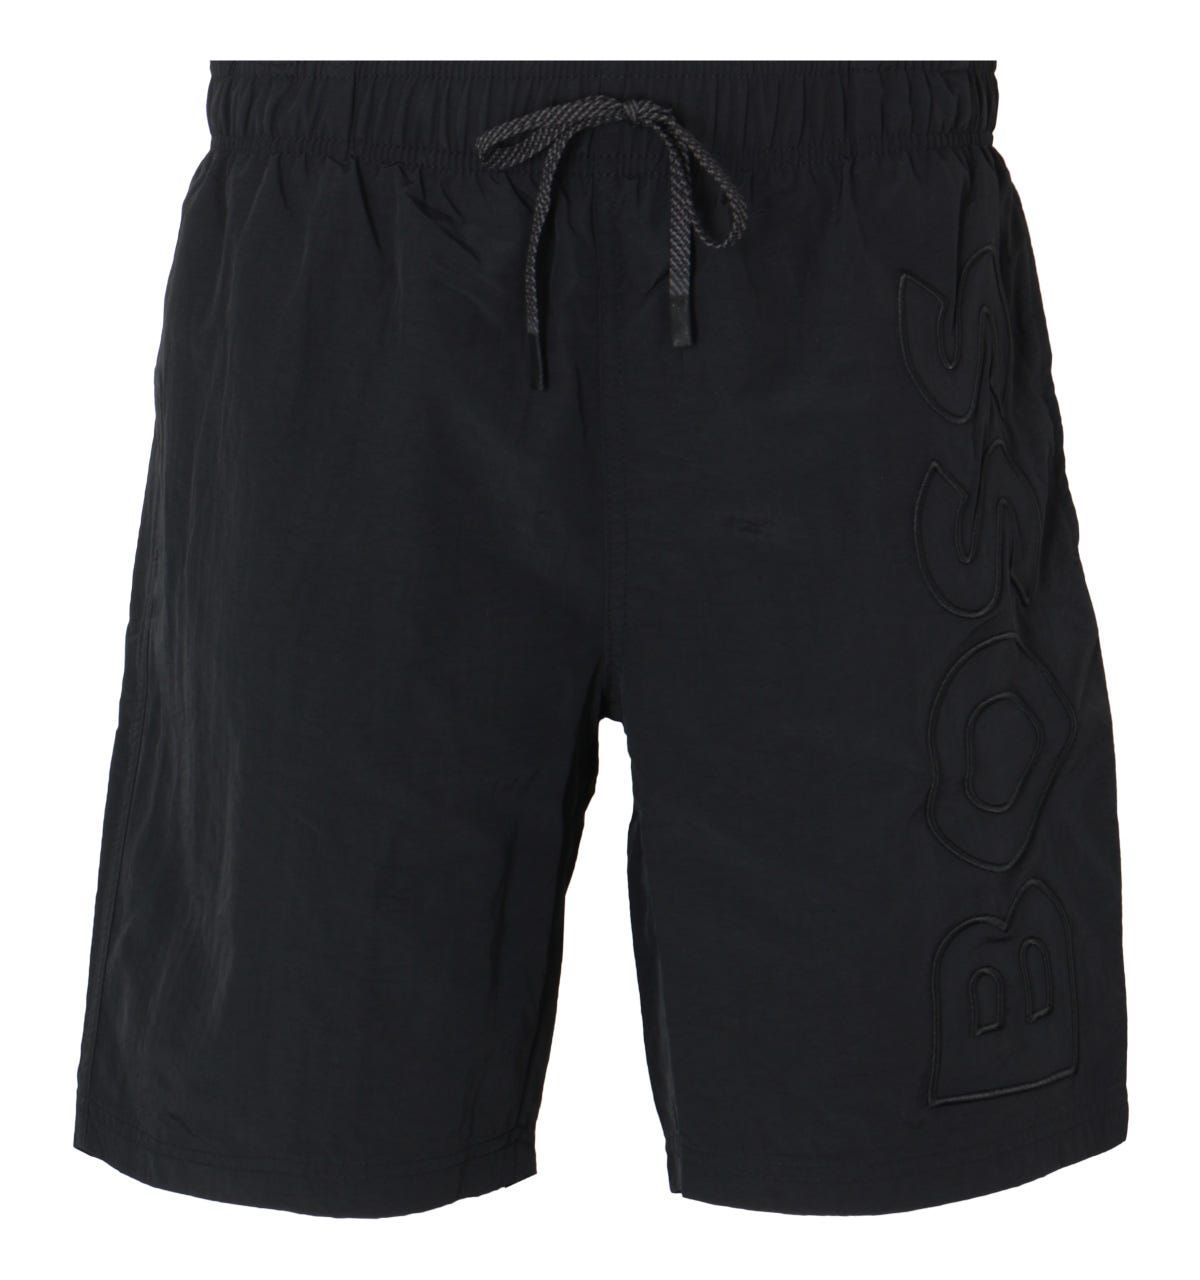 Swim in style this season with BOSS bodywear. These sporty swim shorts are crafted from a quick drying nylon fabric with a mesh lining for extra support. Featuring an elasticated drawstring waist, twin side seam pockets and a rear welt pocket. Finished with a large BOSS logo embroidered to the left leg.\nRegular Fit, Quick Dry Nylon, Elasticated Drawstring Waist, Twin Side Seam Pockets, Rear Welt Pocket,